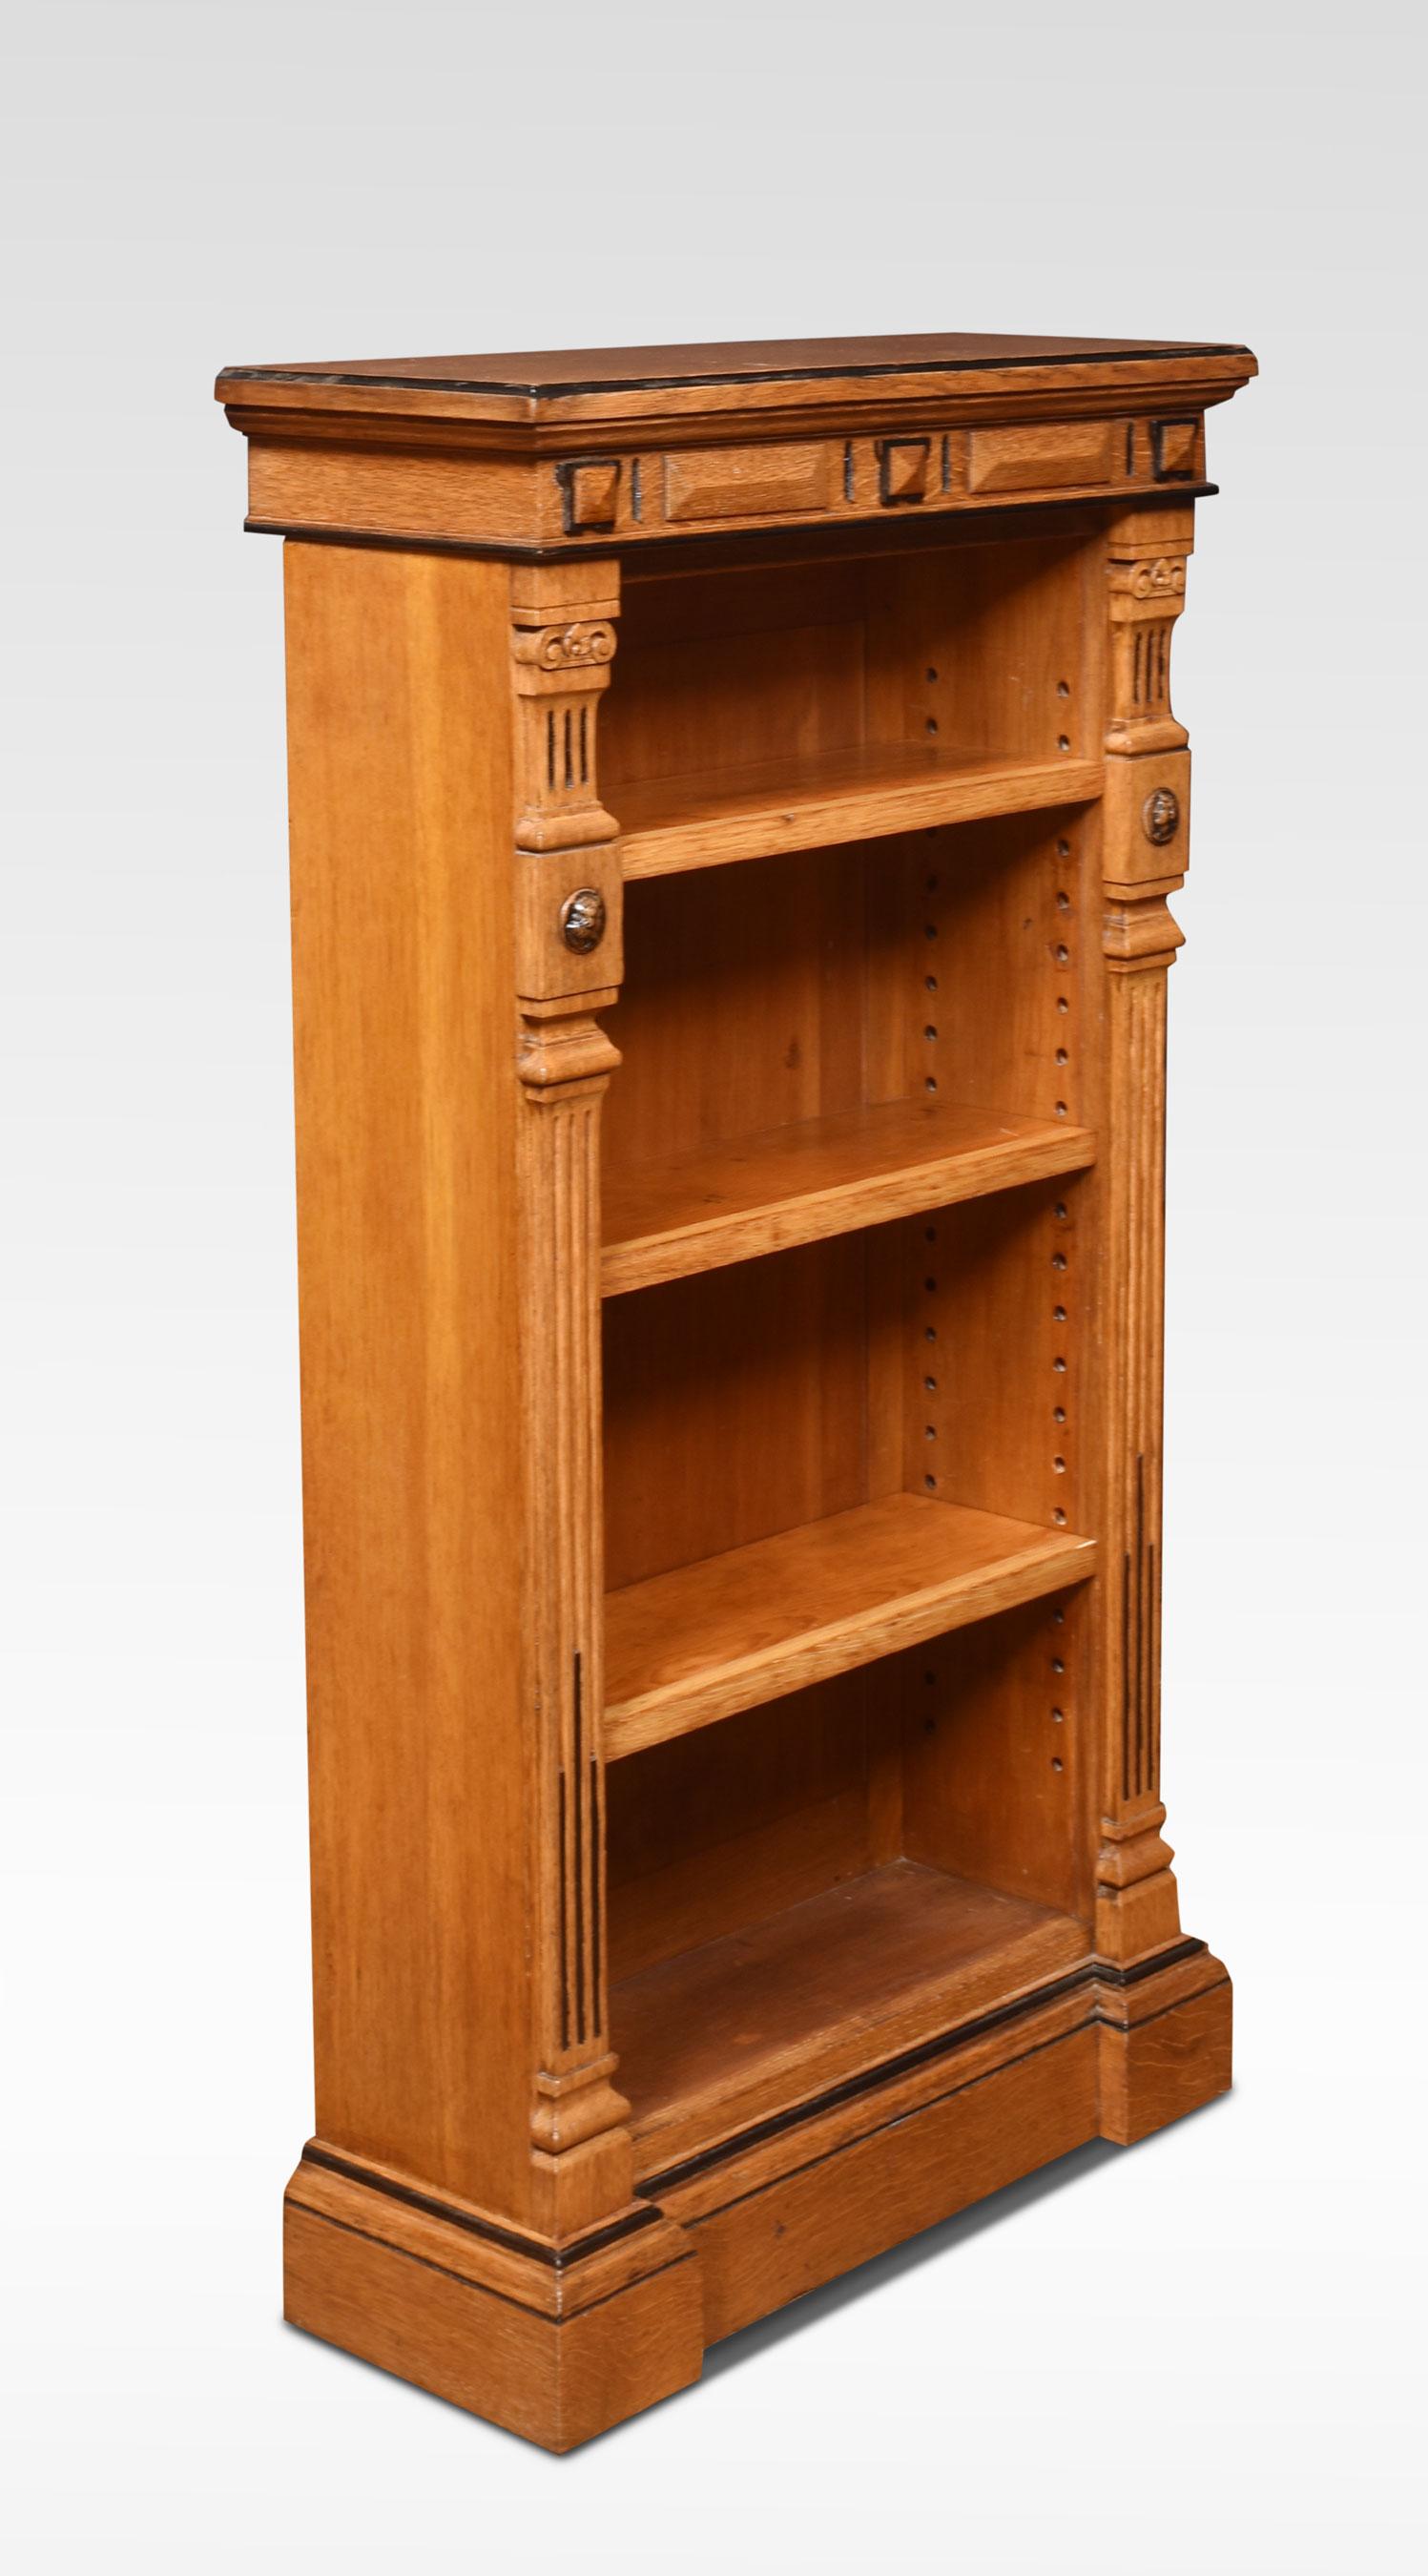 Aesthetic oak open bookcase of small proportions, the rectangular top above a carved frieze with ebonized detail, to the adjustable shelving flanked by reeded columns. All raised up on plinth base.
Dimensions
Height 44.5 Inches
Width 24